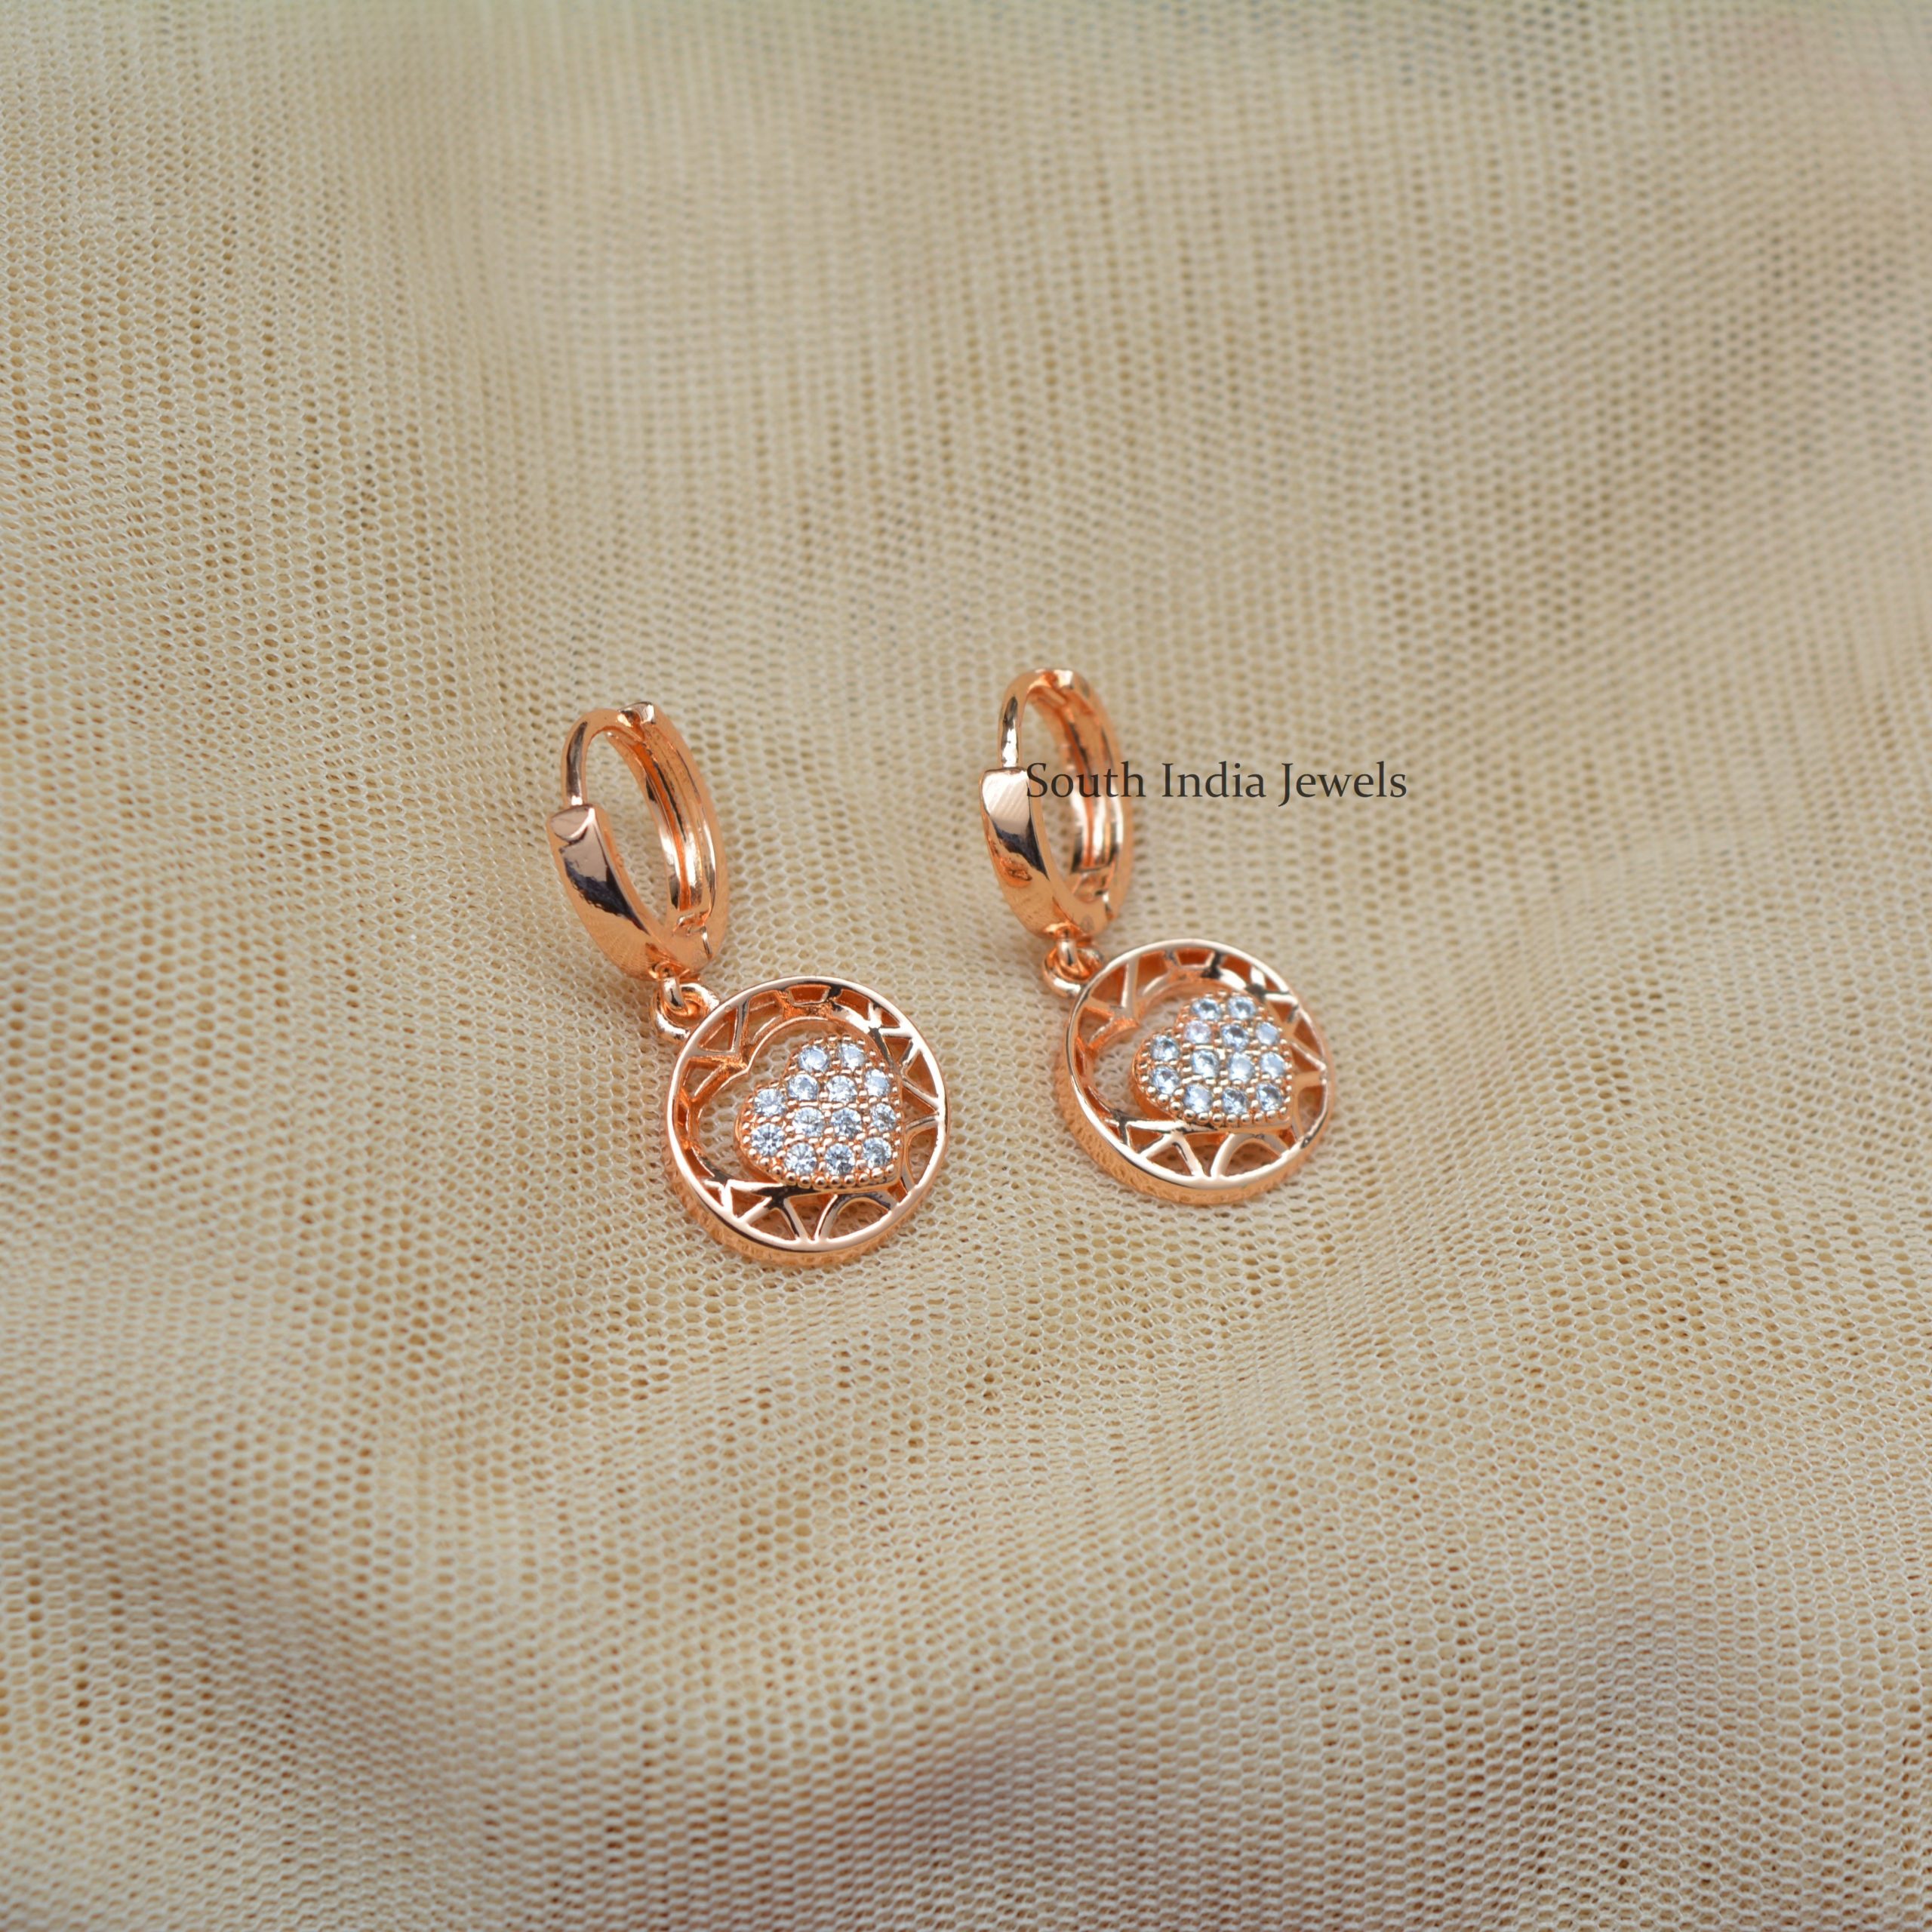 Carlton London Rose GoldPlated Contemporary Half Hoop Earrings Buy  Carlton London Rose GoldPlated Contemporary Half Hoop Earrings Online at  Best Price in India  Nykaa